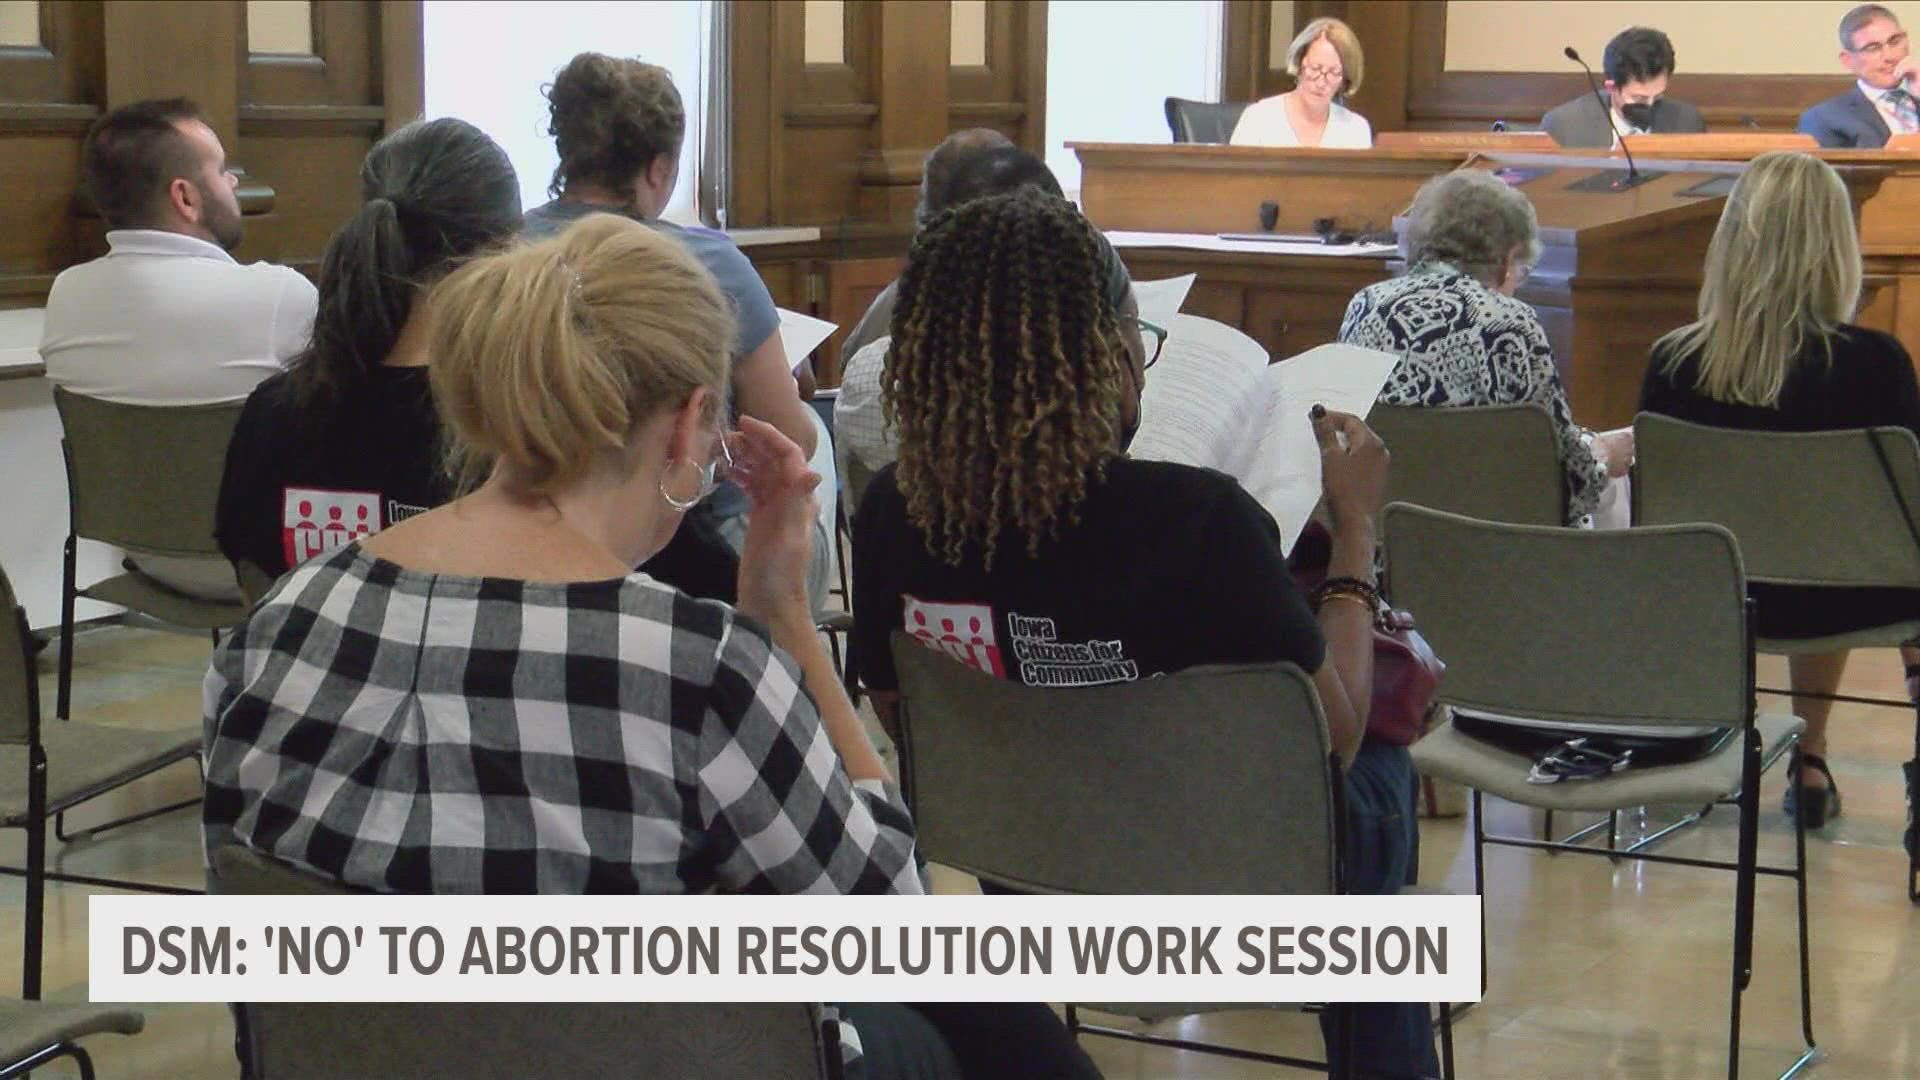 The proposed resolution would prohibit the city from using its funds to release or store any reproductive information to employers and agencies.